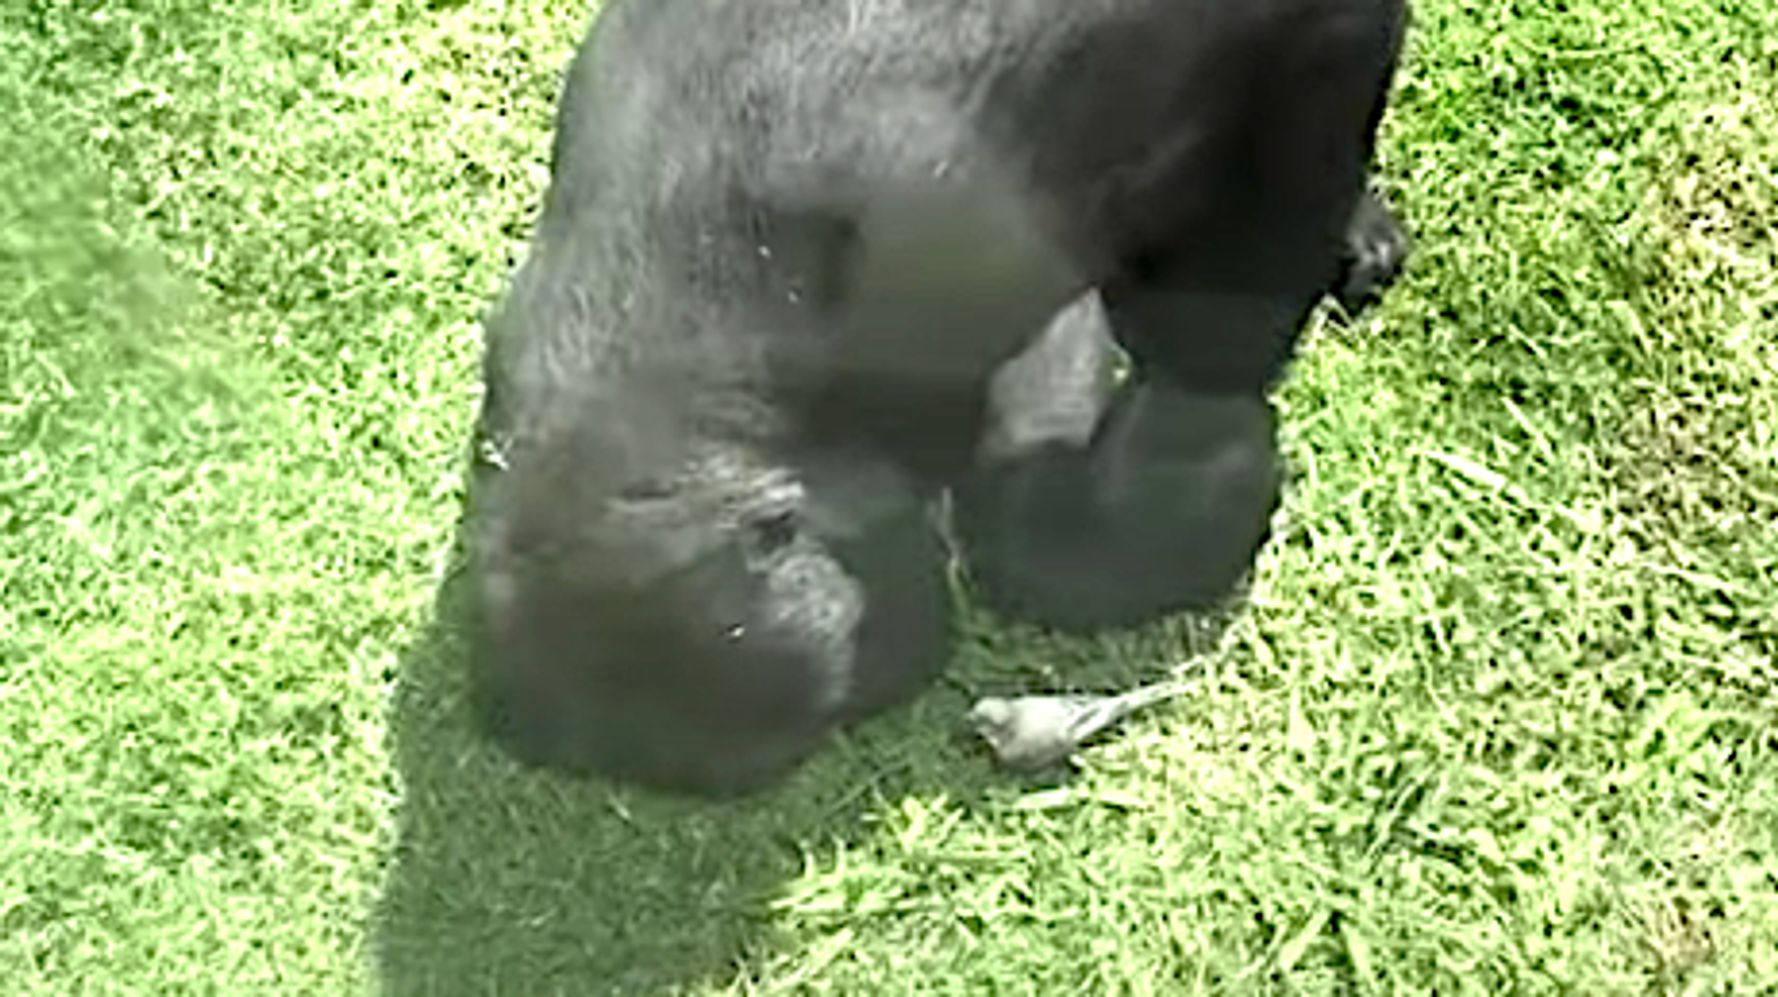 Gorilla Tends To Injured Bird In Heart-Melting Display Of Kindness